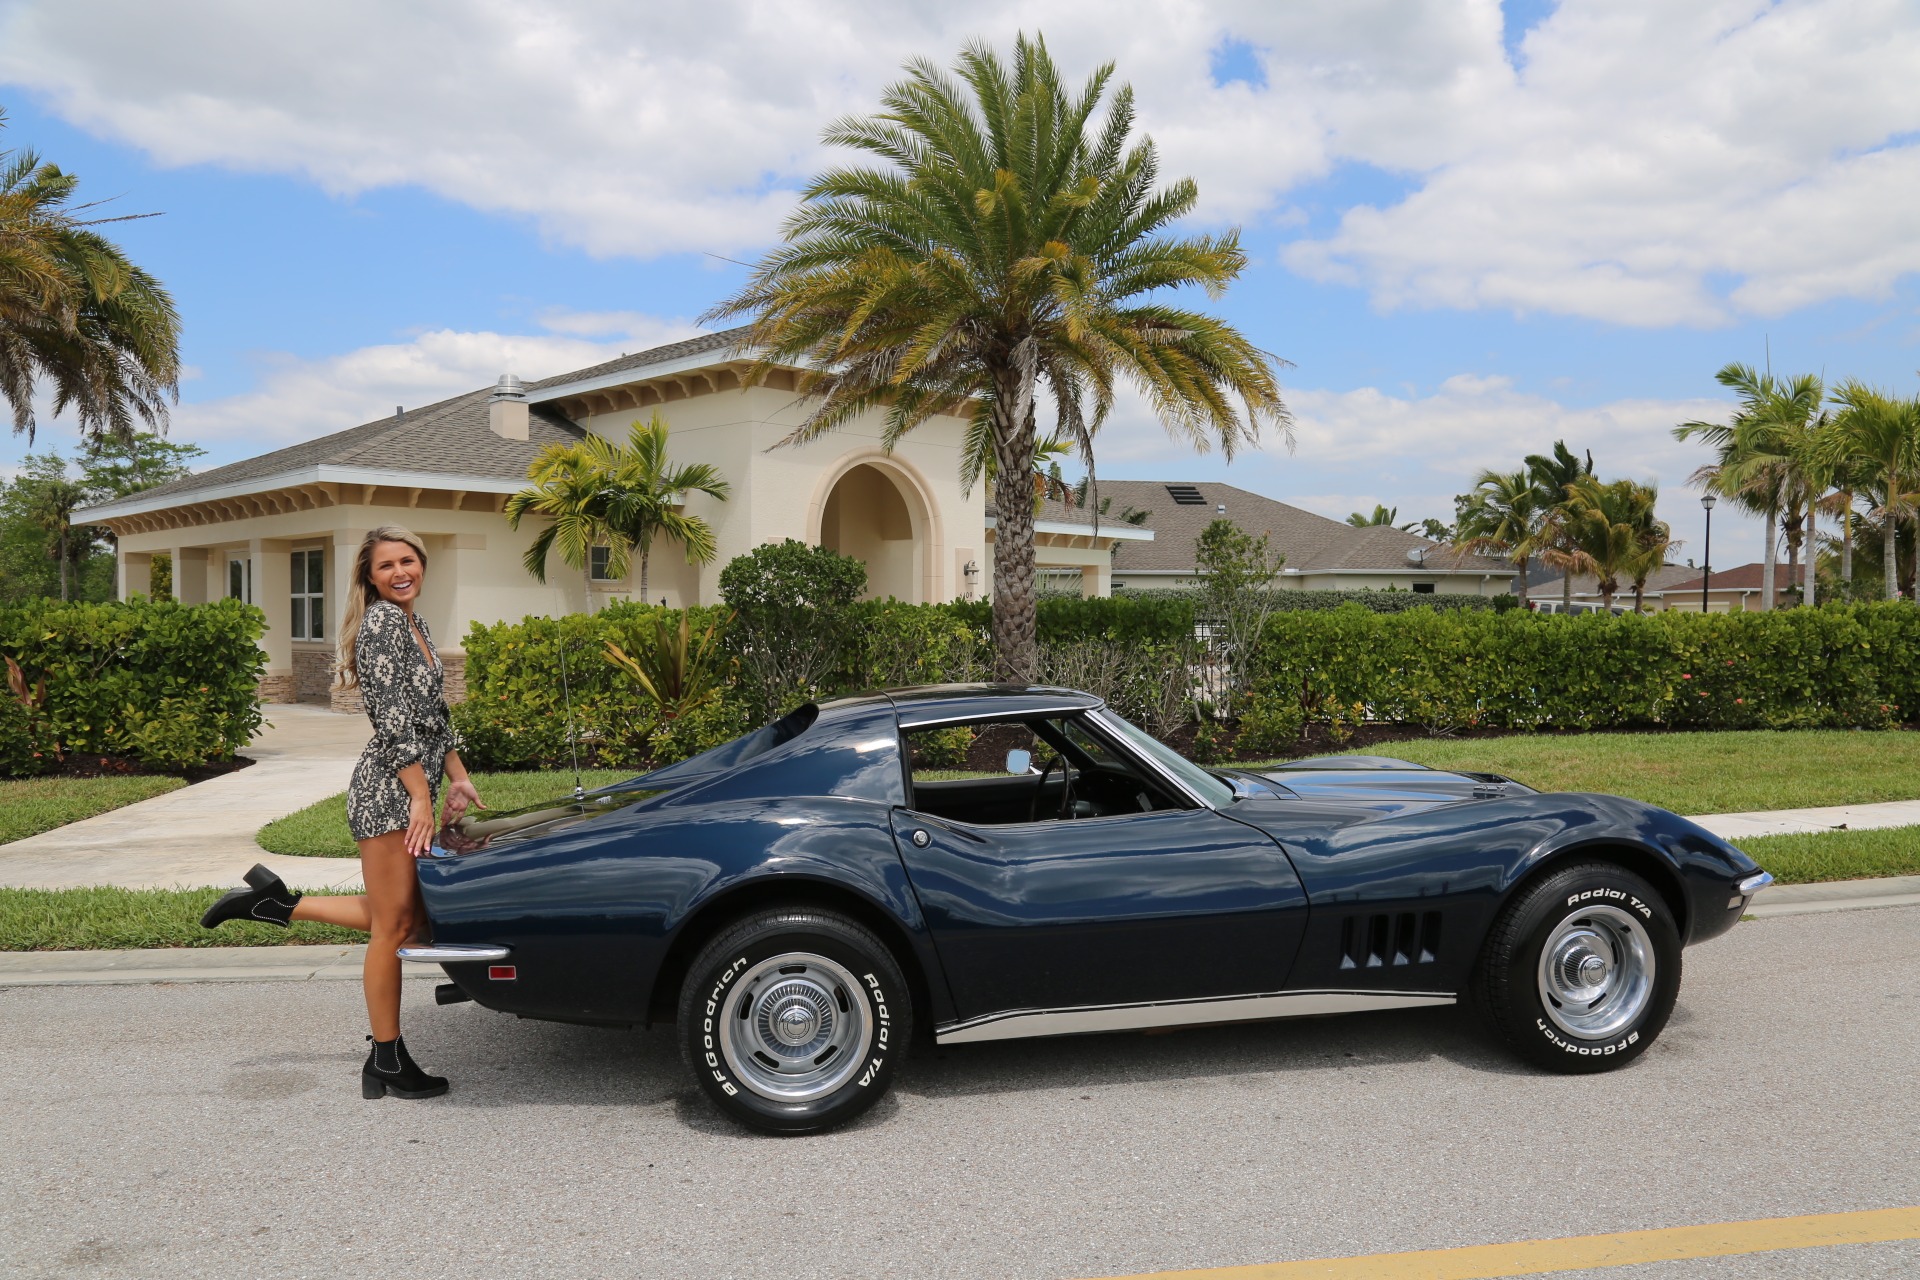 Used 1968 Chevrolet Corvette Stingray for sale Sold at Muscle Cars for Sale Inc. in Fort Myers FL 33912 4